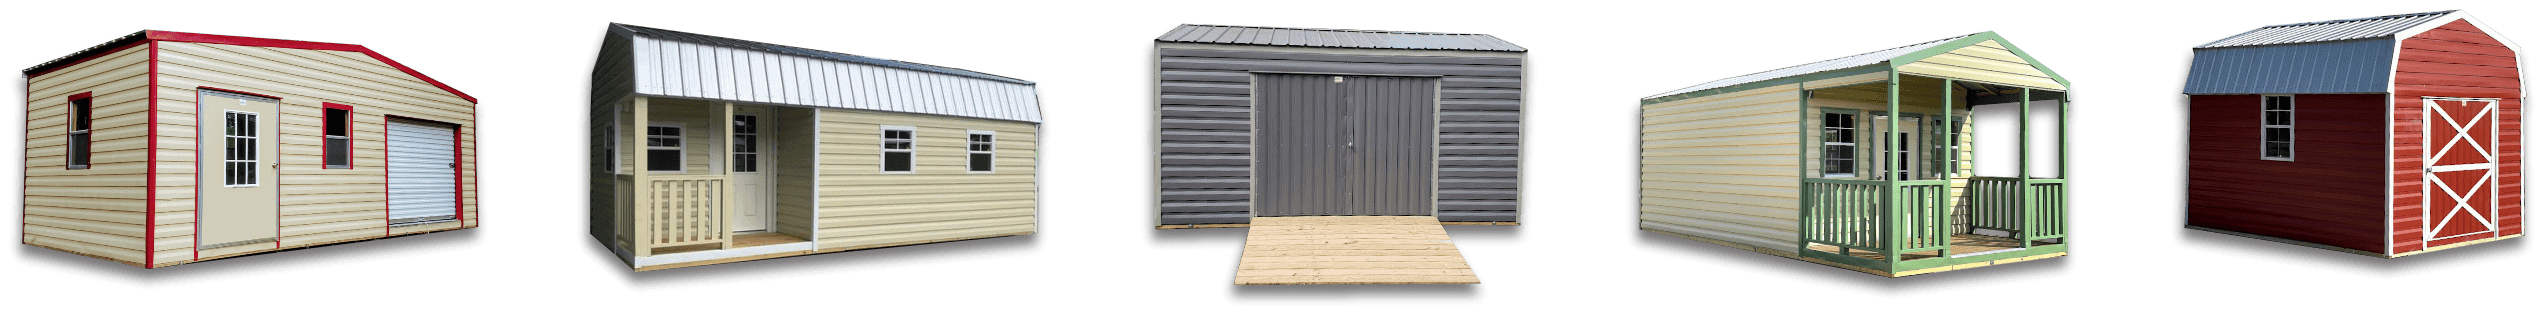 24x30 Sheds for Sale - Explore Affordable and Reliable 24x30 Portable Buildings and Storage Sheds at Robin Sheds. Find your preferred Shed Style among our exceptional collection of 24x30 Shed options and Outdoor Storage Buildings for sale.